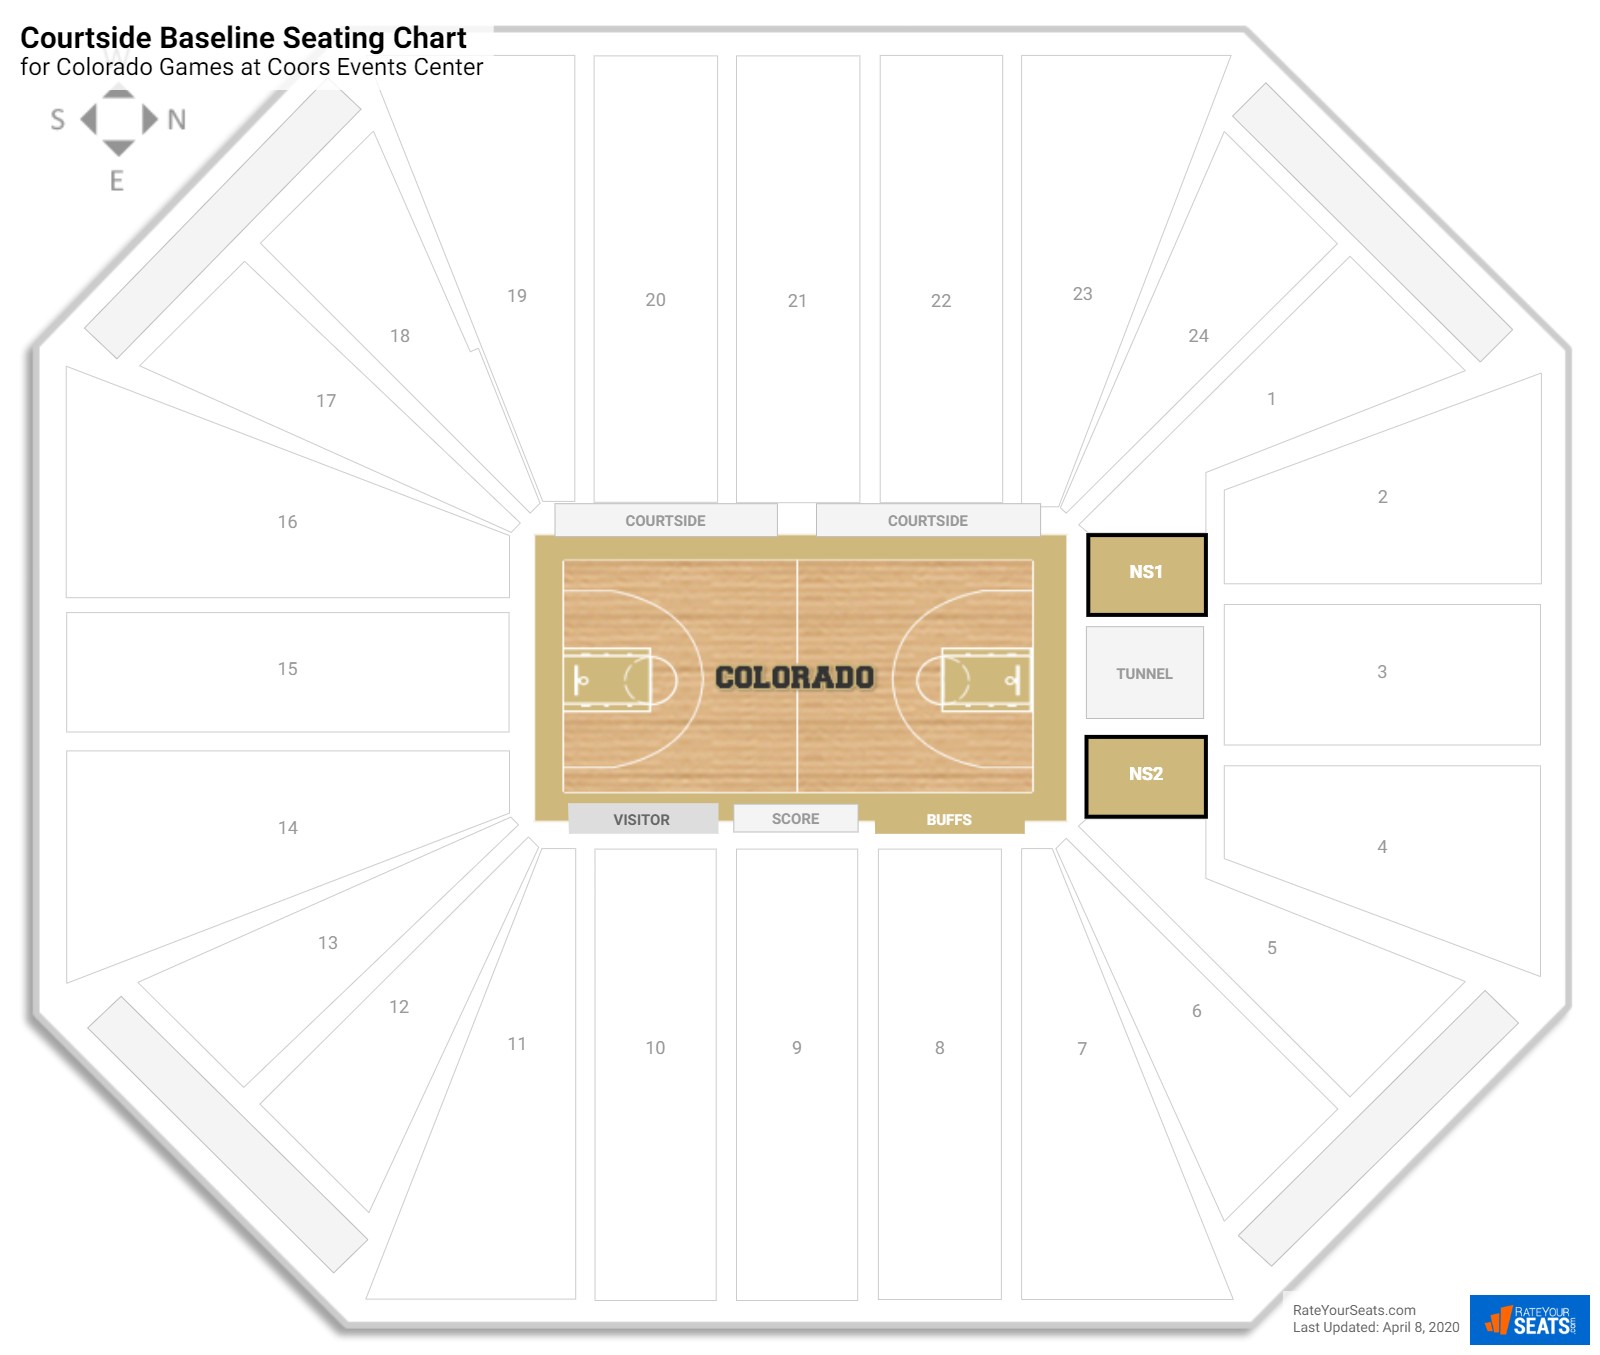 Coors Event Center Seating Chart